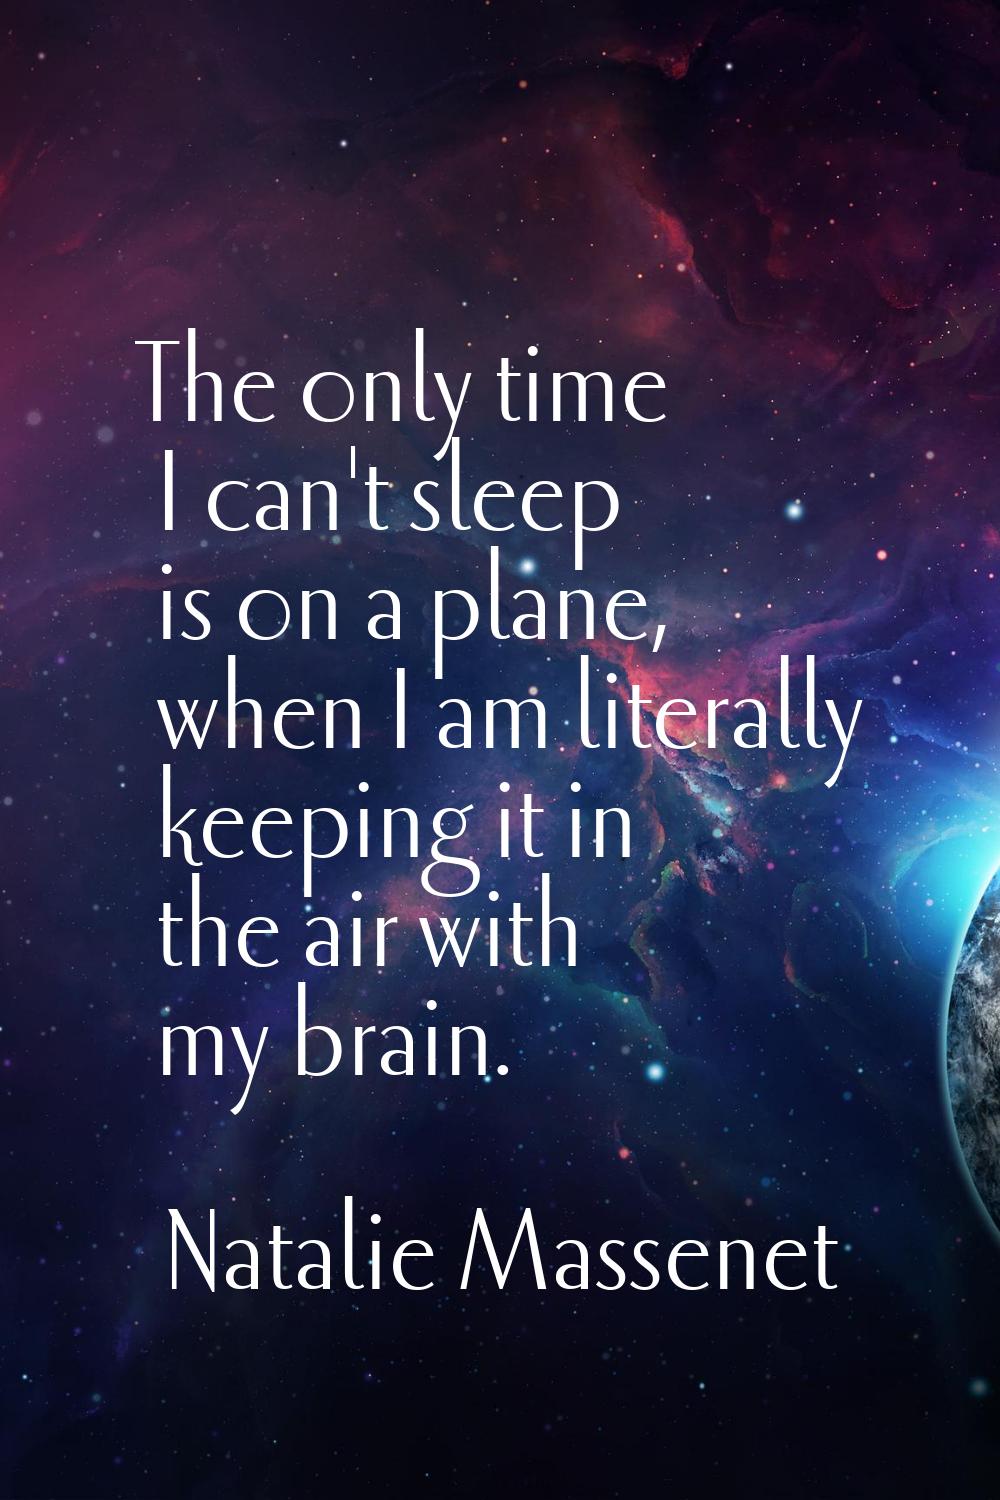 The only time I can't sleep is on a plane, when I am literally keeping it in the air with my brain.